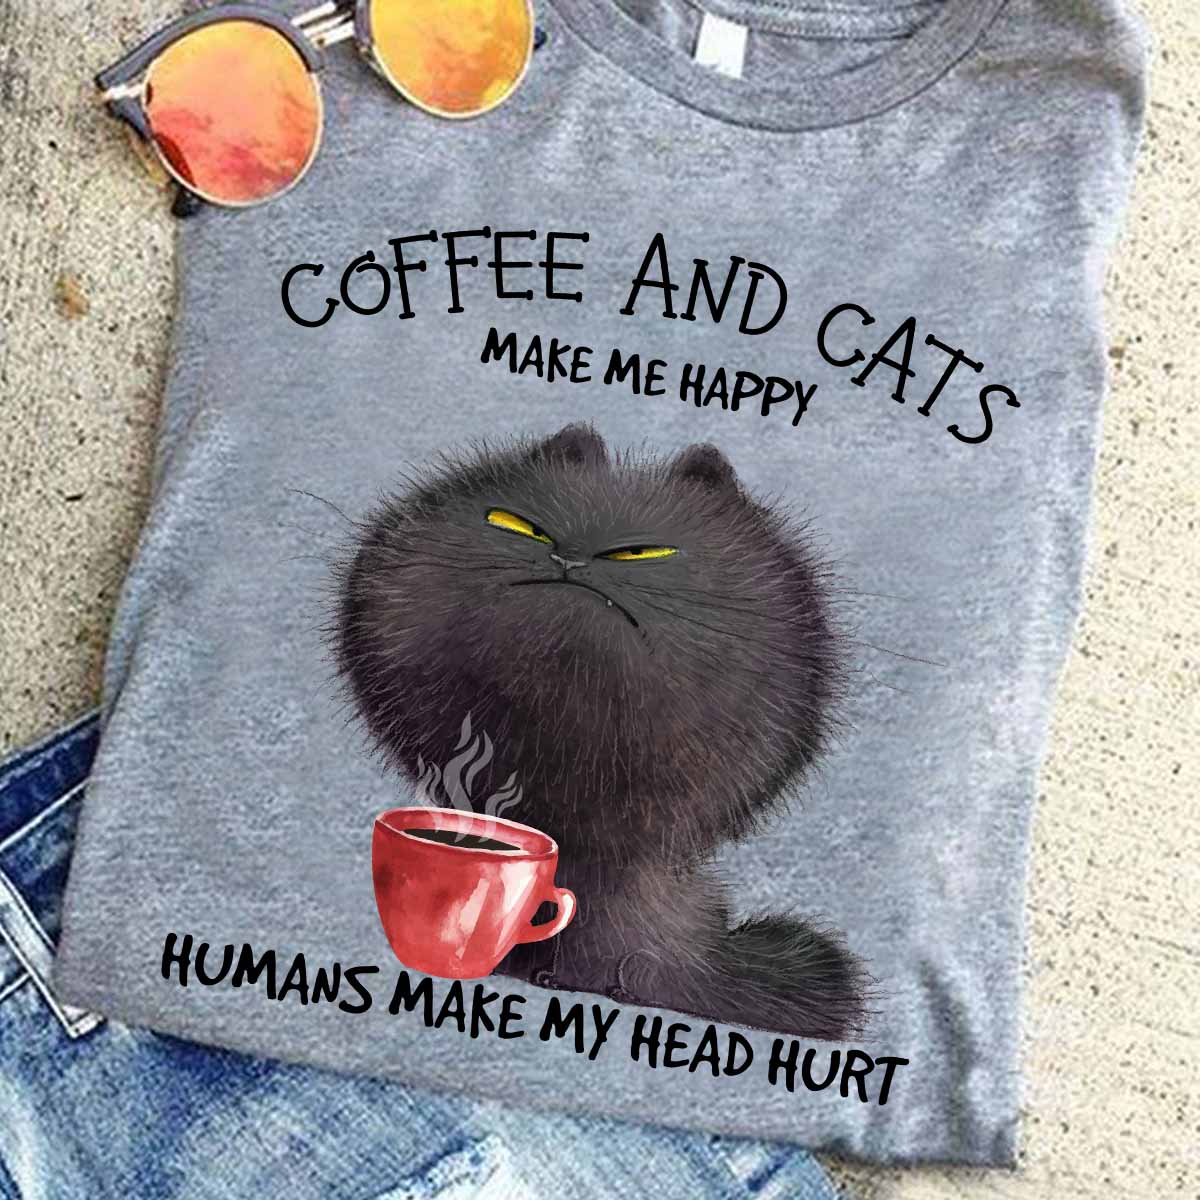 Coffee and cats make me happy - Coffee lover and cat